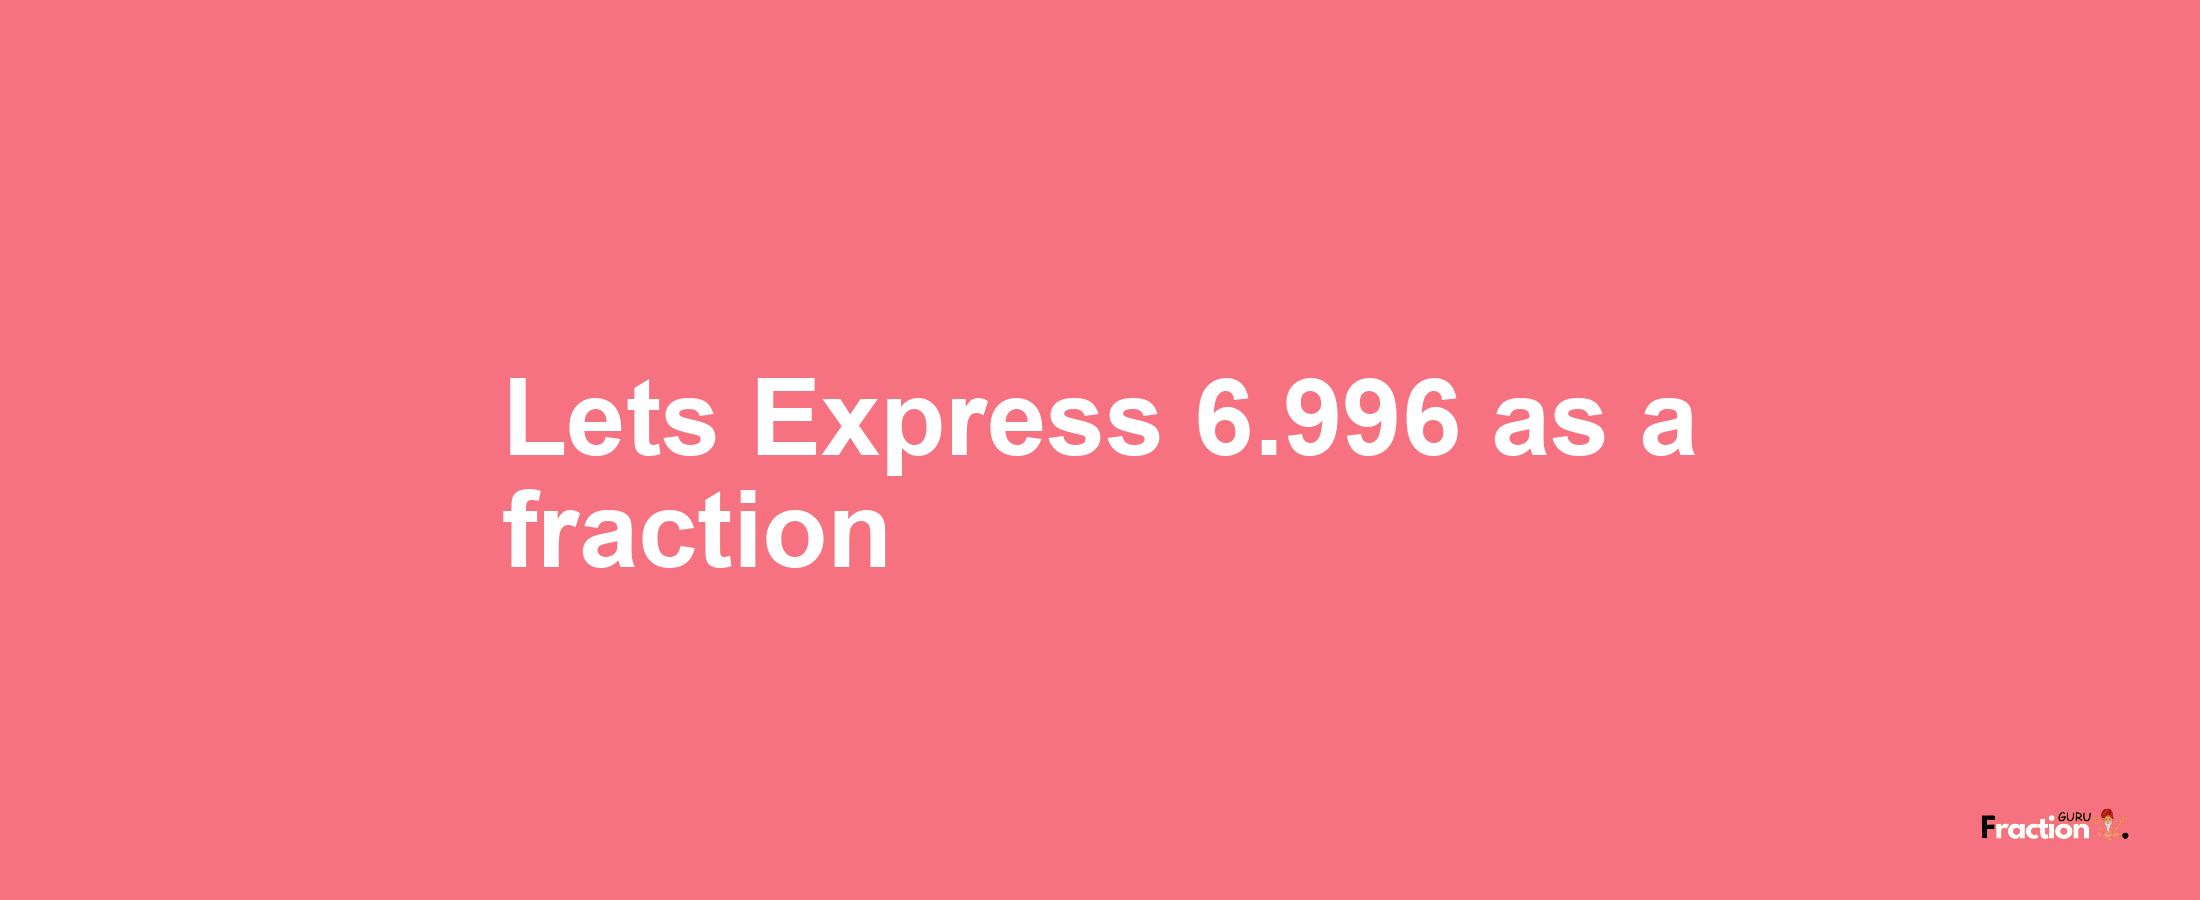 Lets Express 6.996 as afraction